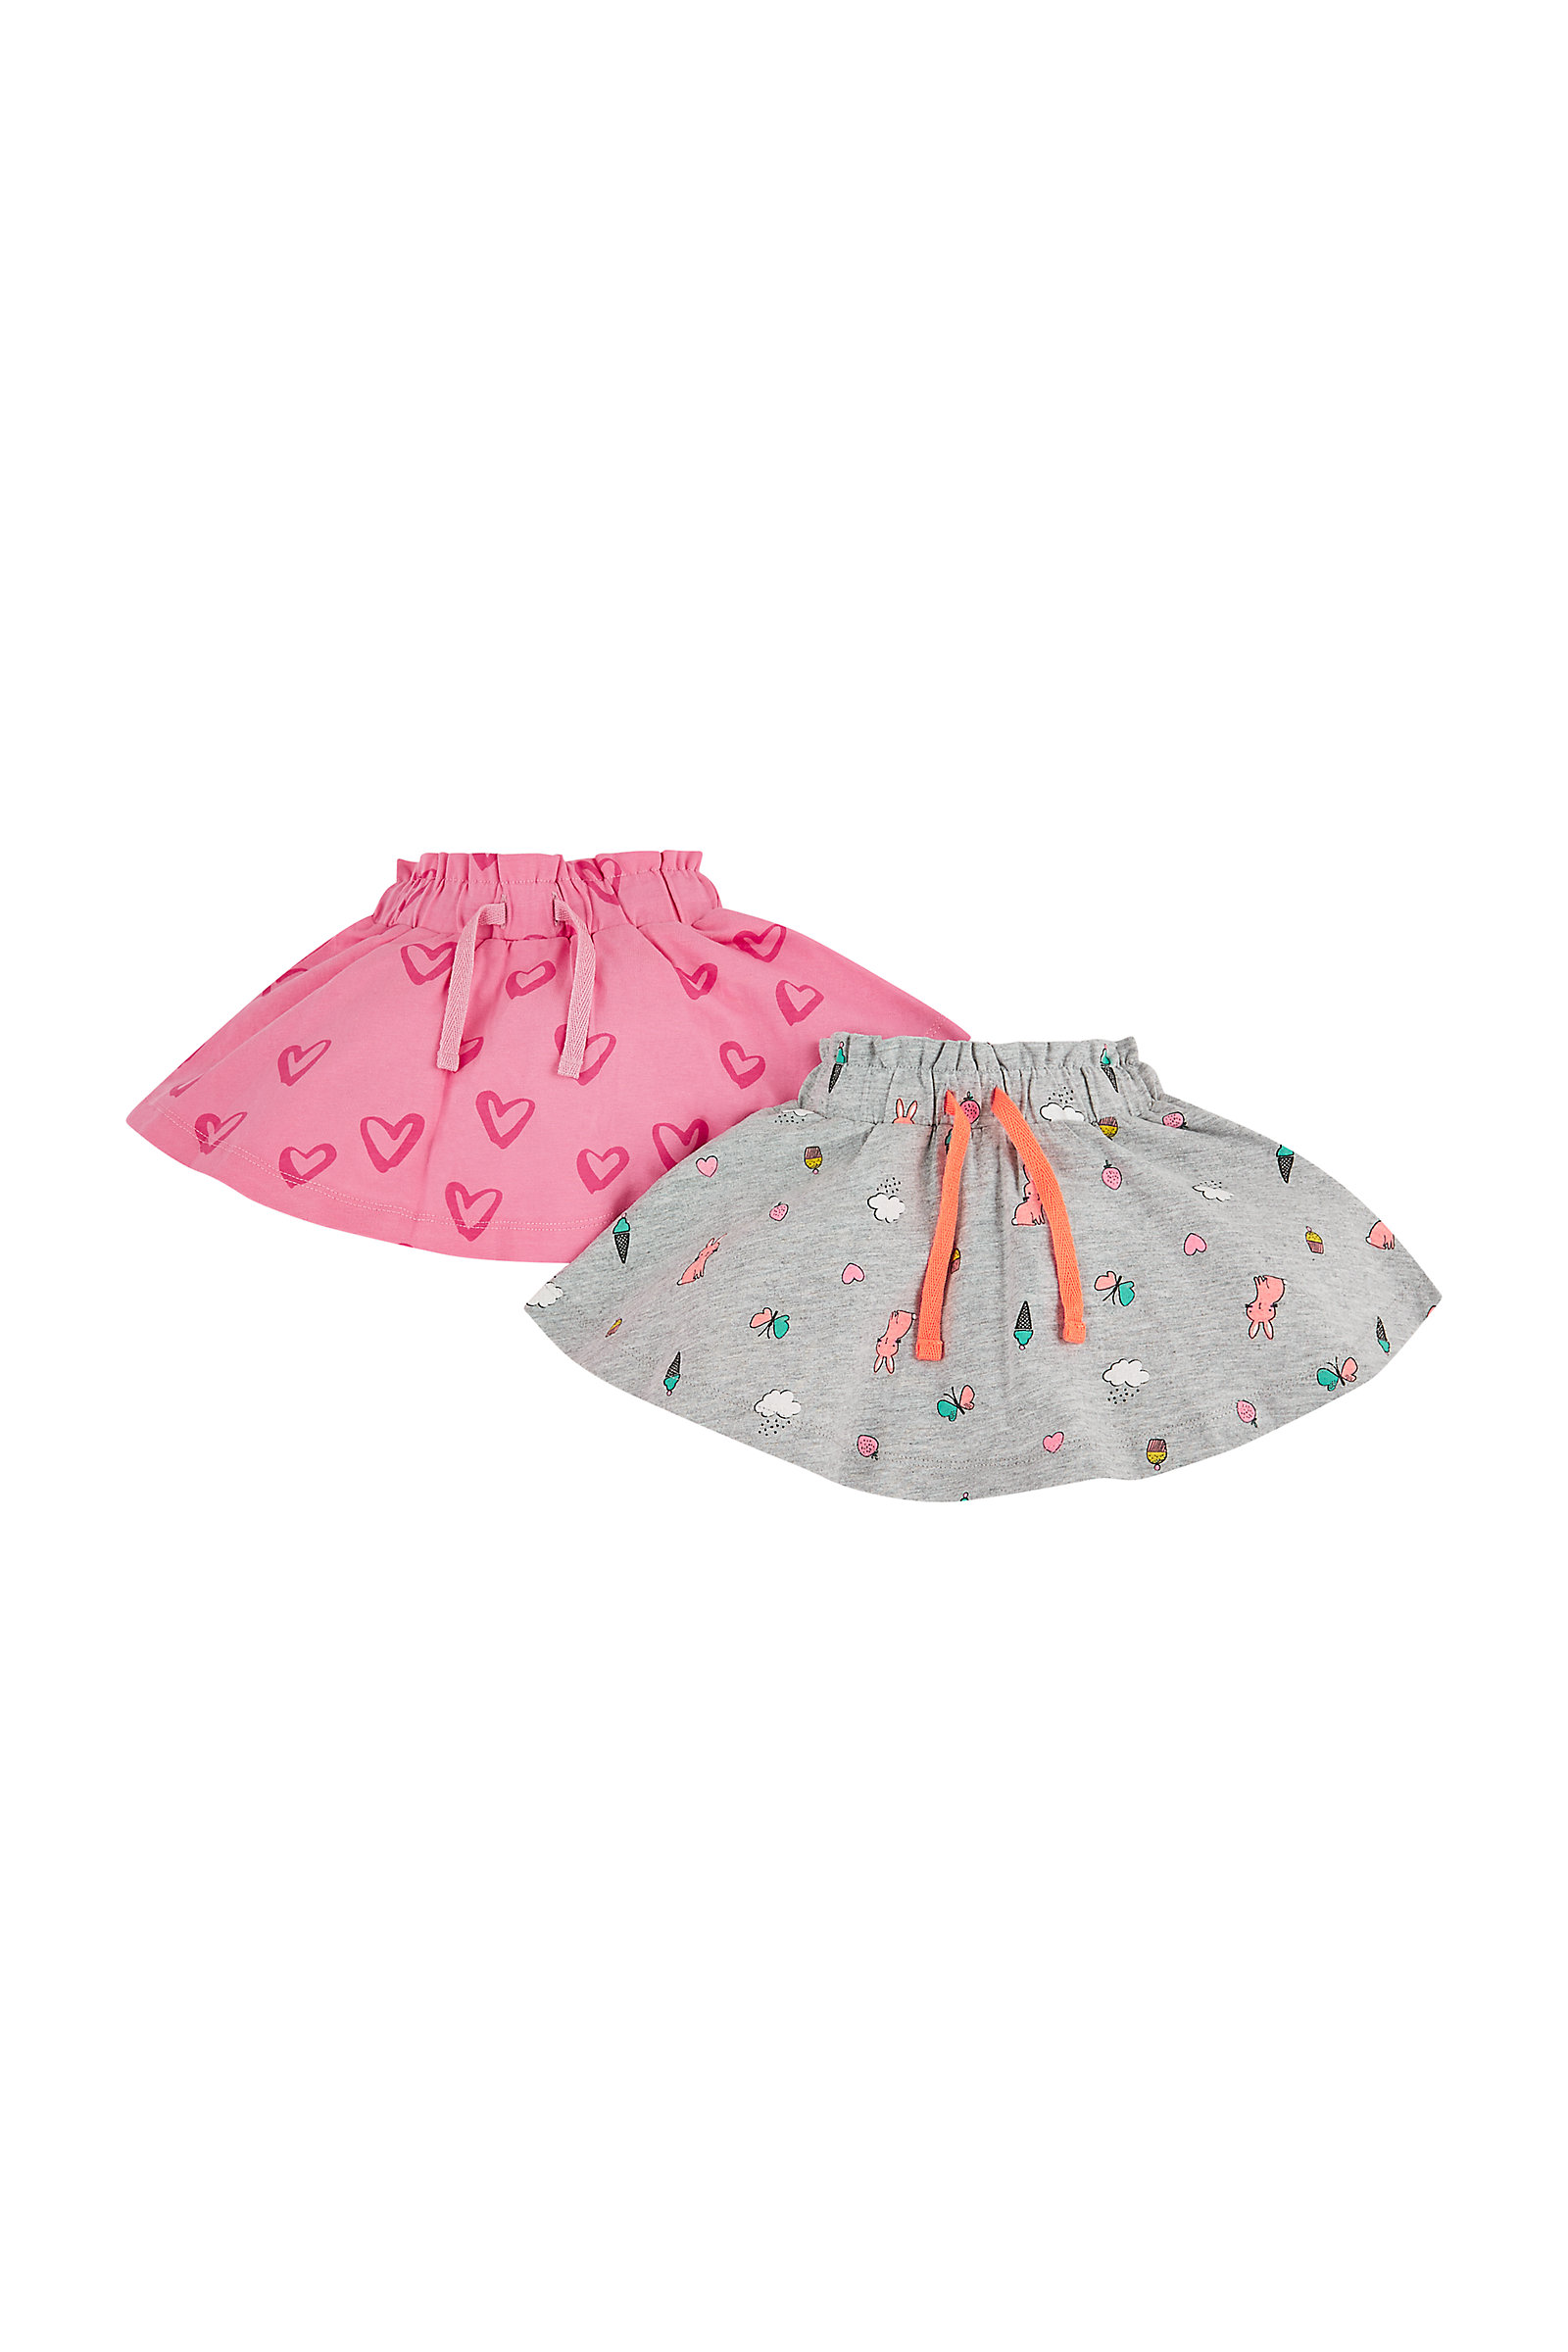 Mothercare Girls Printed Multicolor Skirt